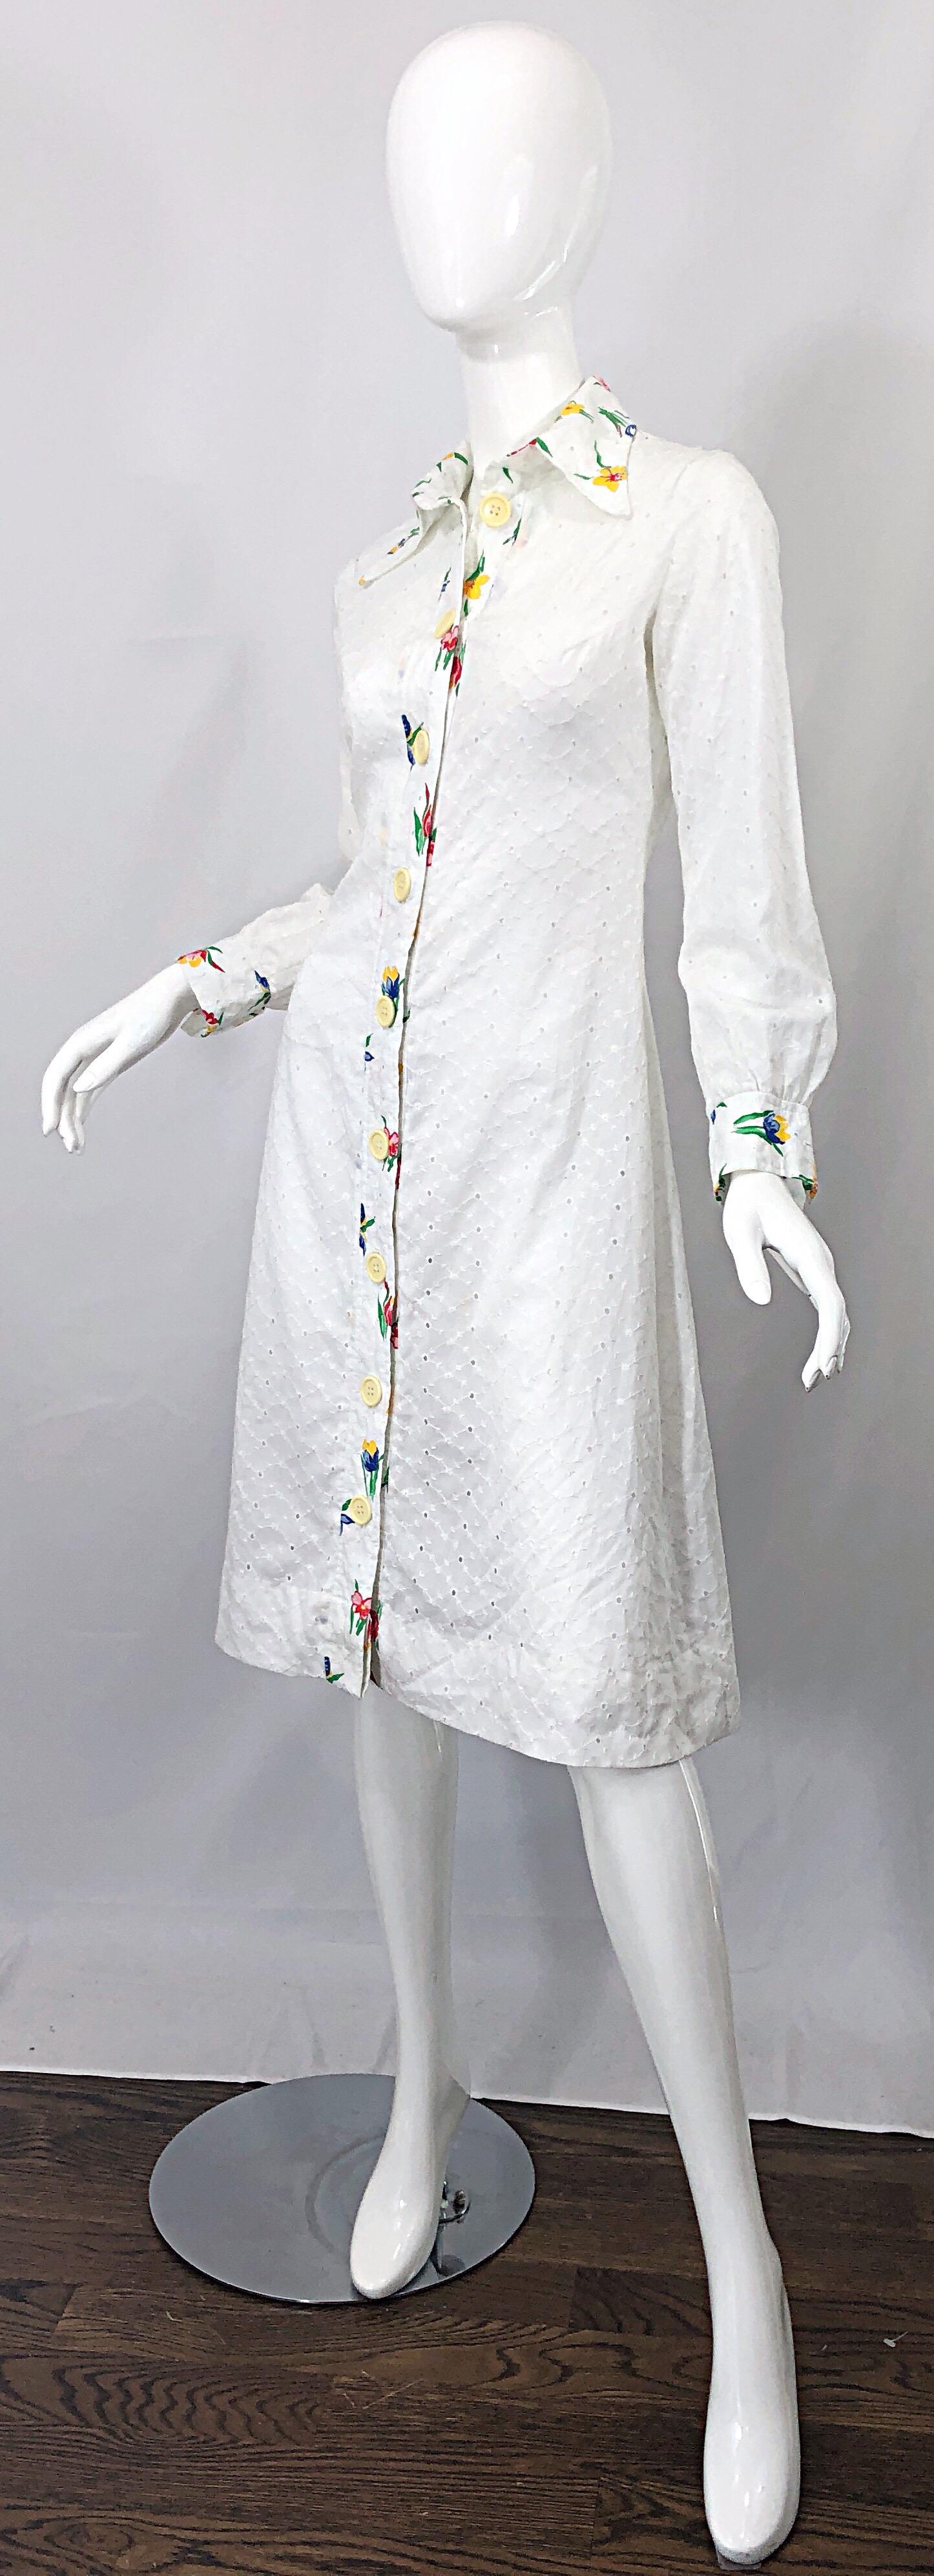 1970s Joseph Magnin White Eyelet Cotton Embrodiered Vintage 70s Shirt Dress For Sale 2